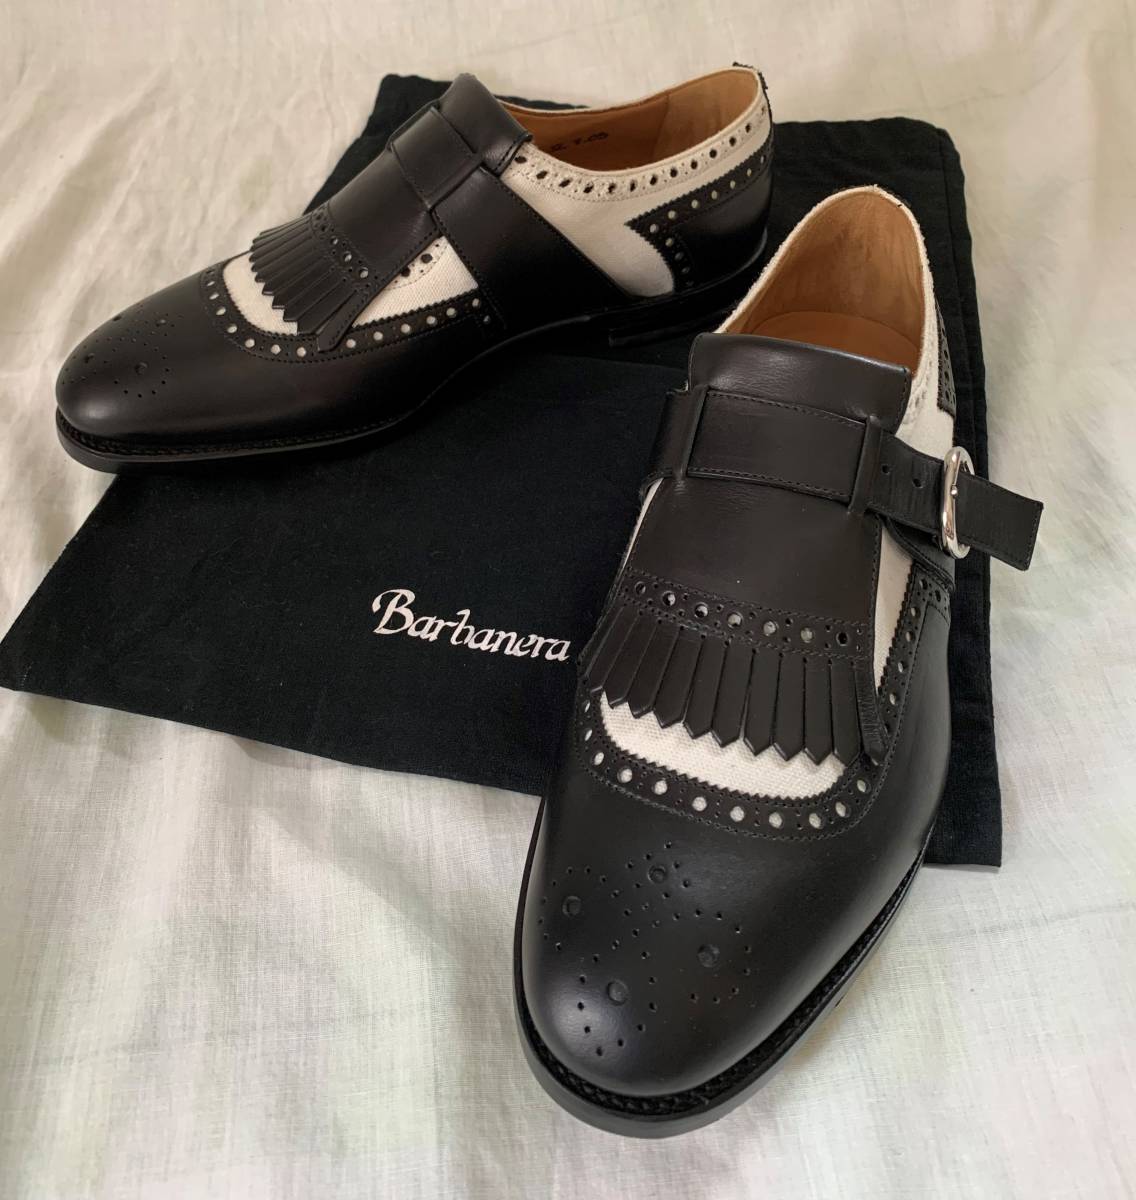 * prompt decision * new goods cheap * bar spring -la(BARBANERA) quilt tassel single monk shoes * Italy made * regular price 99,360 jpy *7.5* black × white *